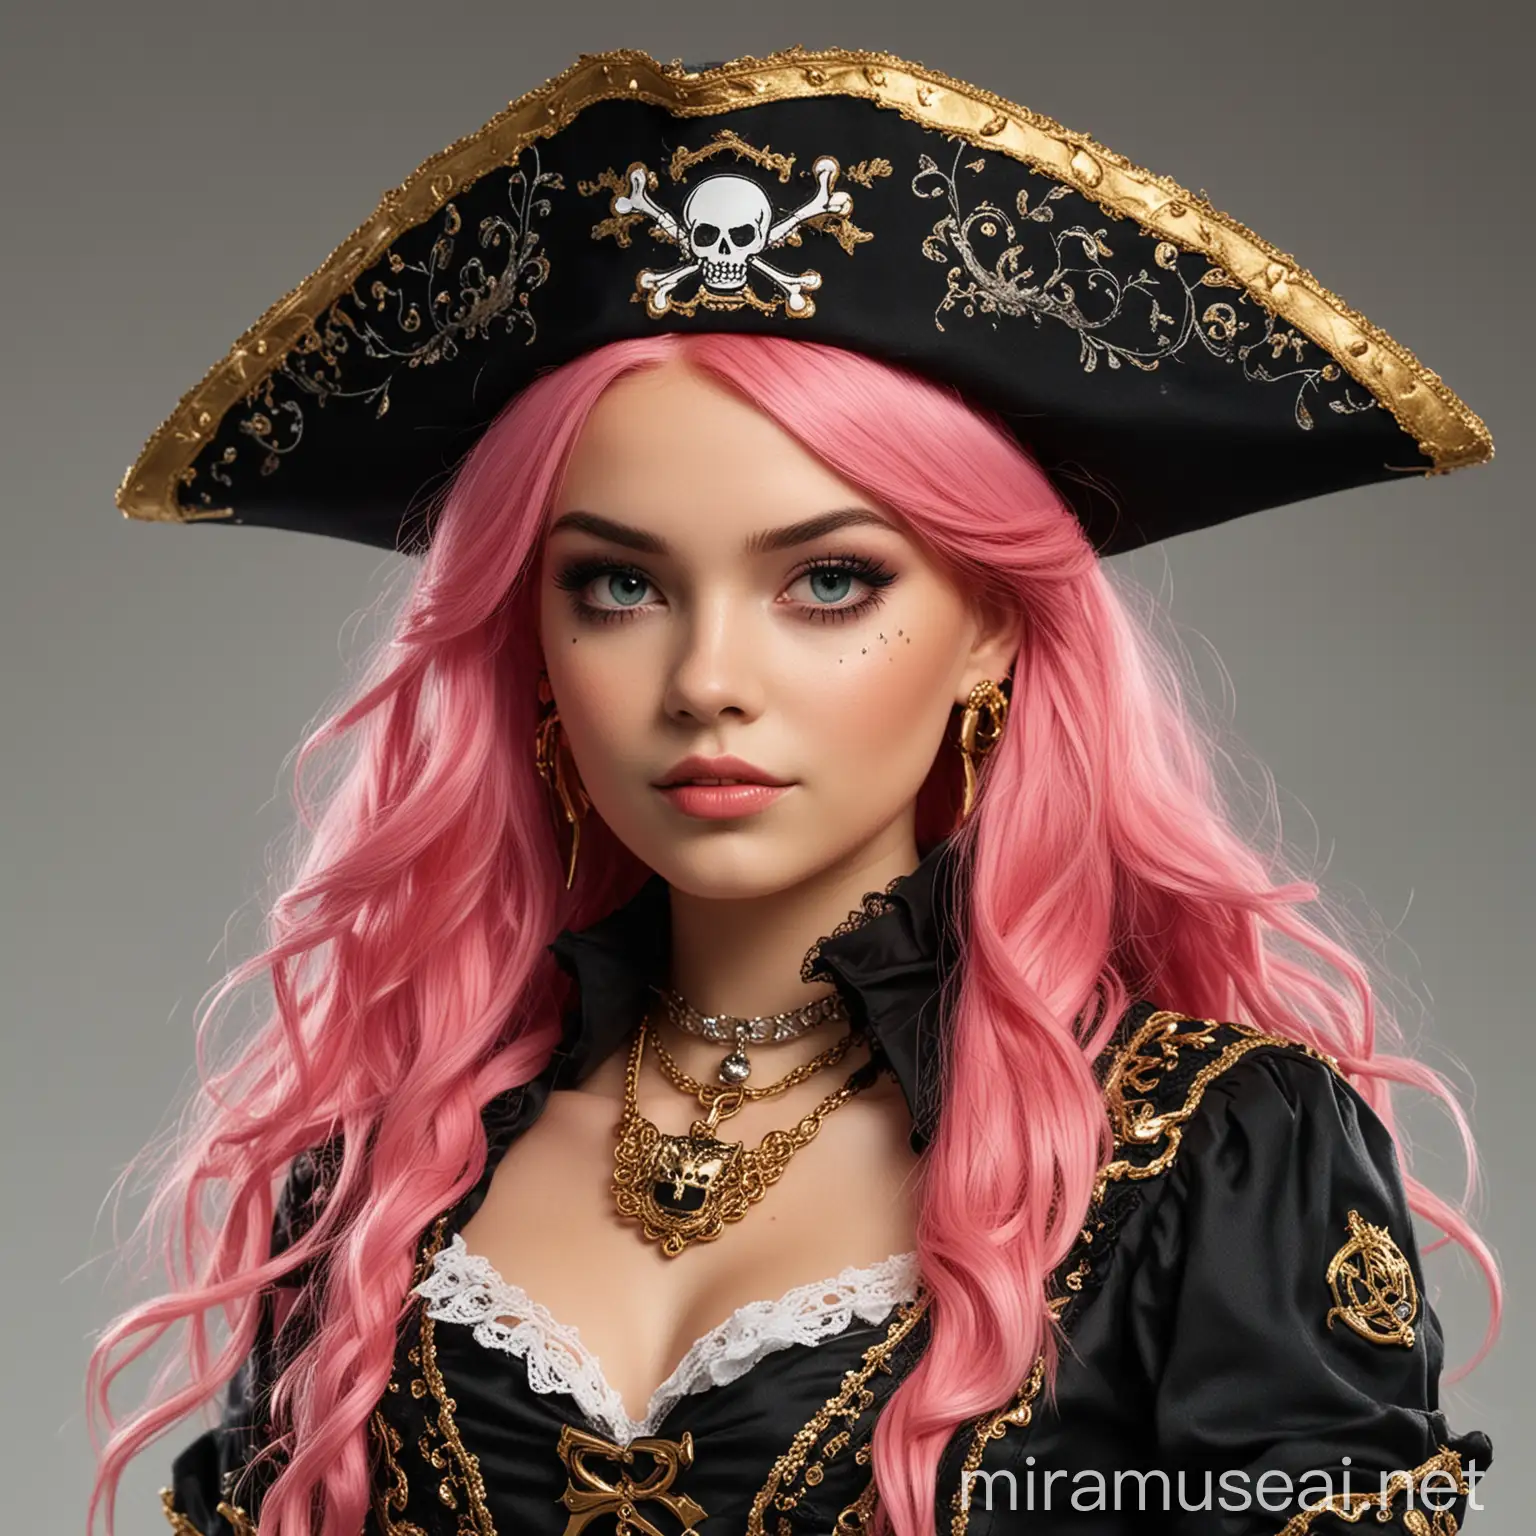 Hat: Liliana wears a black pirate hat with gold trim and a skull emblem on the front. The hat is adorned with a large red bow on the left side.
Top: She has a revealing pirate-themed outfit. Her top is black with gold accents and white frills. The top has star-shaped coverings with bows, matching the red and pink color scheme.
Accessories: Liliana wears a gold chain necklace with a turquoise pendant.
Jacket: The jacket is black with gold detailing and puffy white sleeves.
Belt: She has a wide brown belt with a large buckle around her waist.
Weapon: In her right hand, she holds a decorative gun, which seems to have a dragon or serpent design.
Face
Hair: She has long pink hair that flows over her shoulders and down her back.
Eyes: Her eyes are a striking pink color, matching her overall color theme.
Expression: Liliana has a confident and slightly mischievous expression, fitting her pirate persona.
Accessories: She has a small decorative lace and bow accessory on her left side of her face, just below her ear.